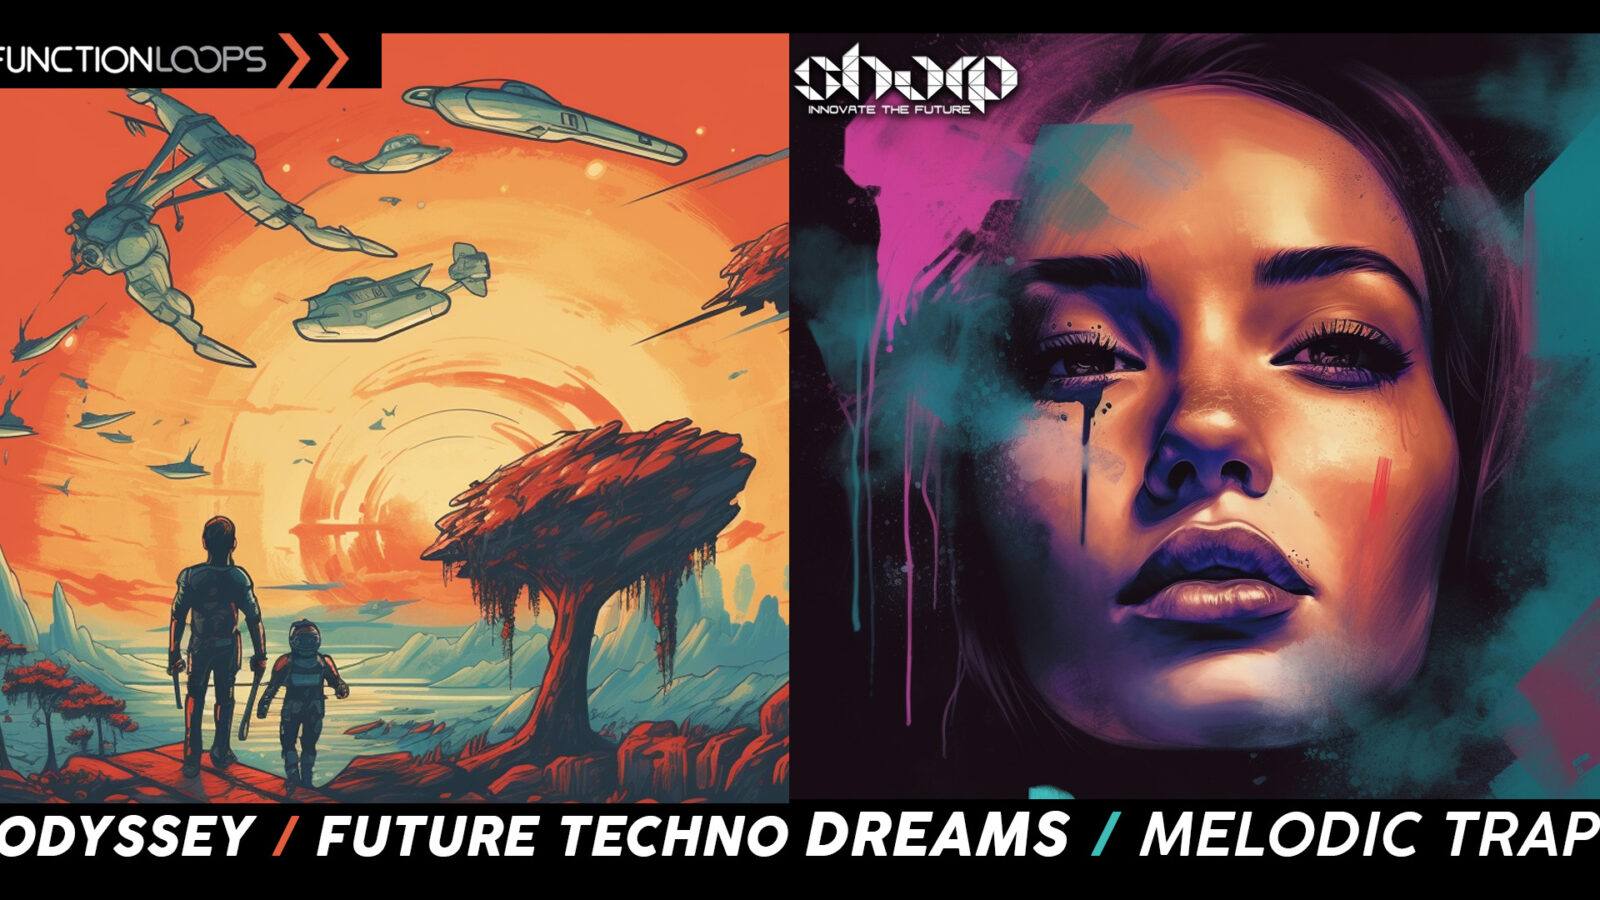 New Packs: Odyssey - Future Techno and Dreams - Melodic Trap